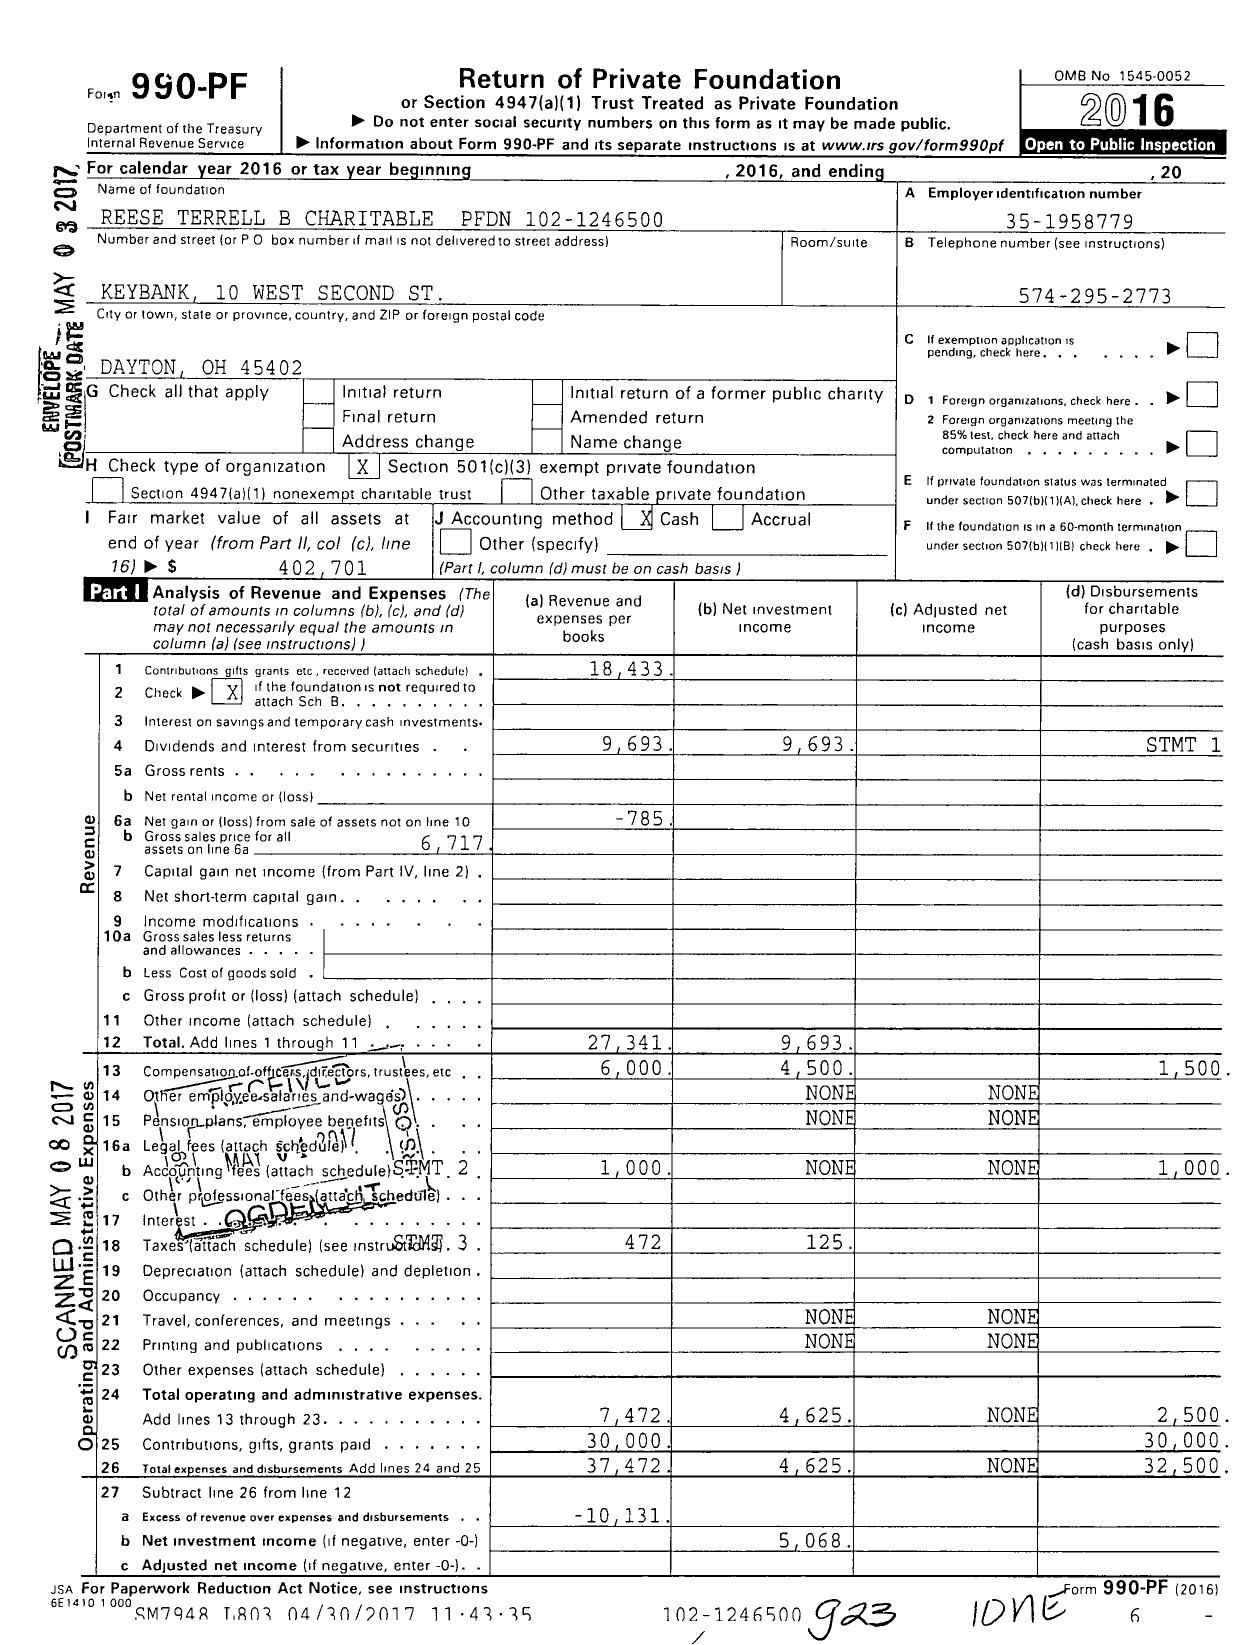 Image of first page of 2016 Form 990PF for Reese Terrell B Charitable PFDN